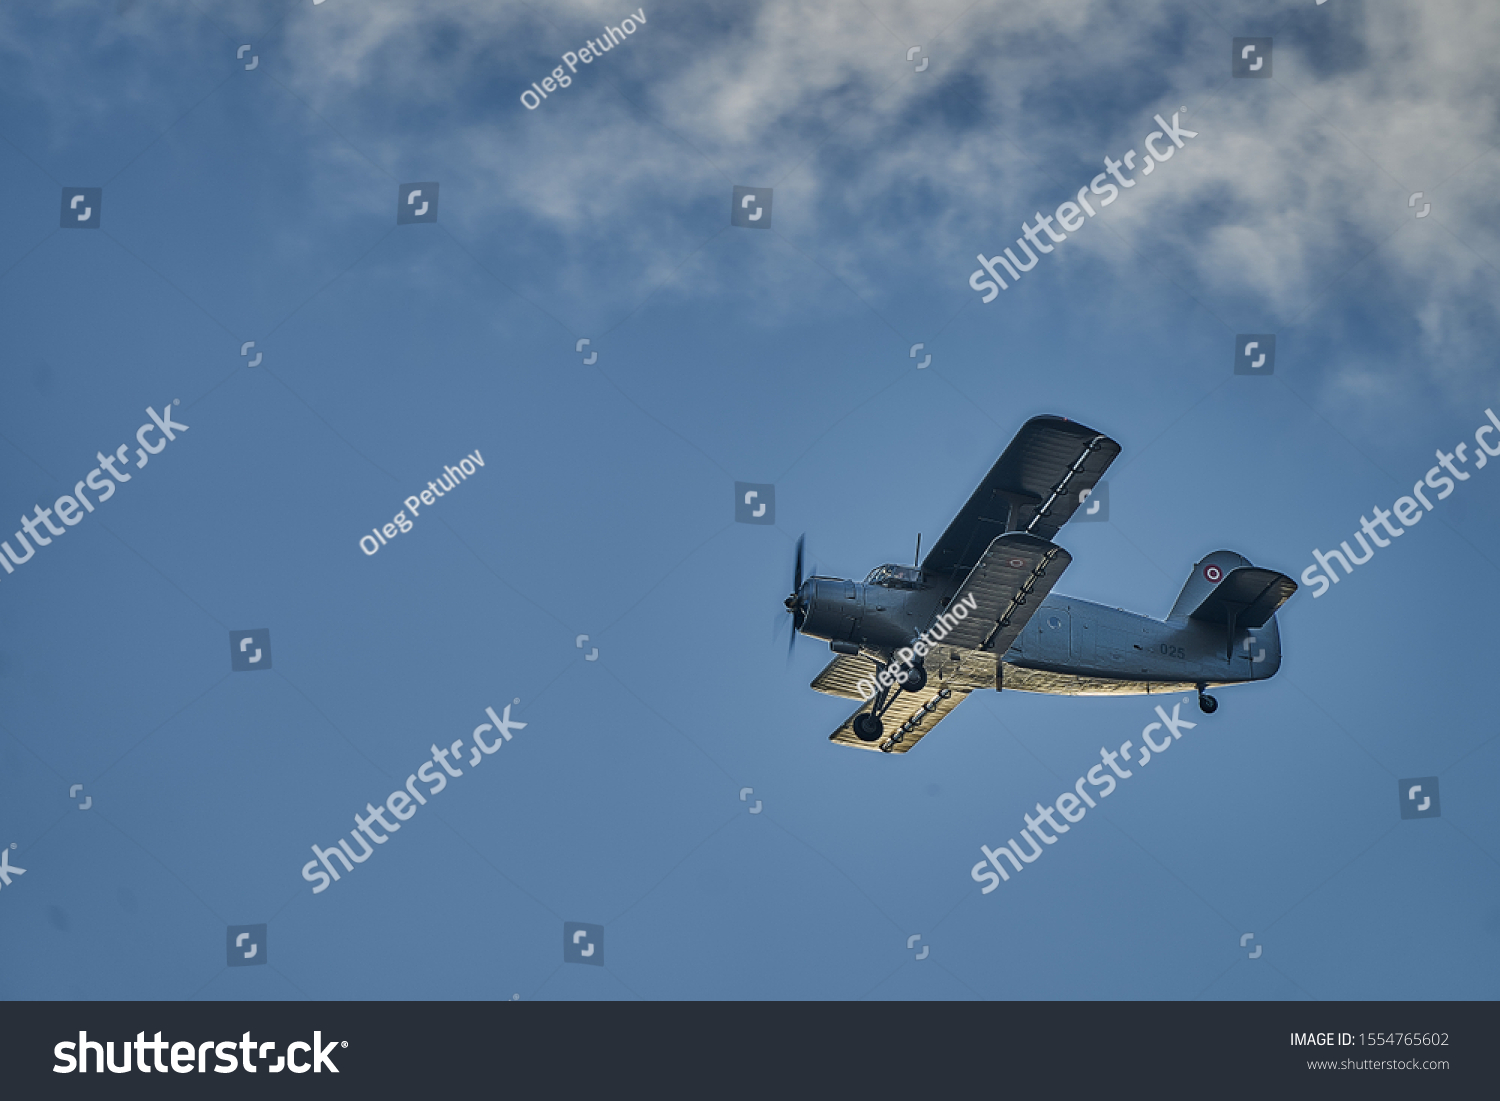 British old aircraft flying above Riga. airplane biplane with piston engine and propeller. #1554765602